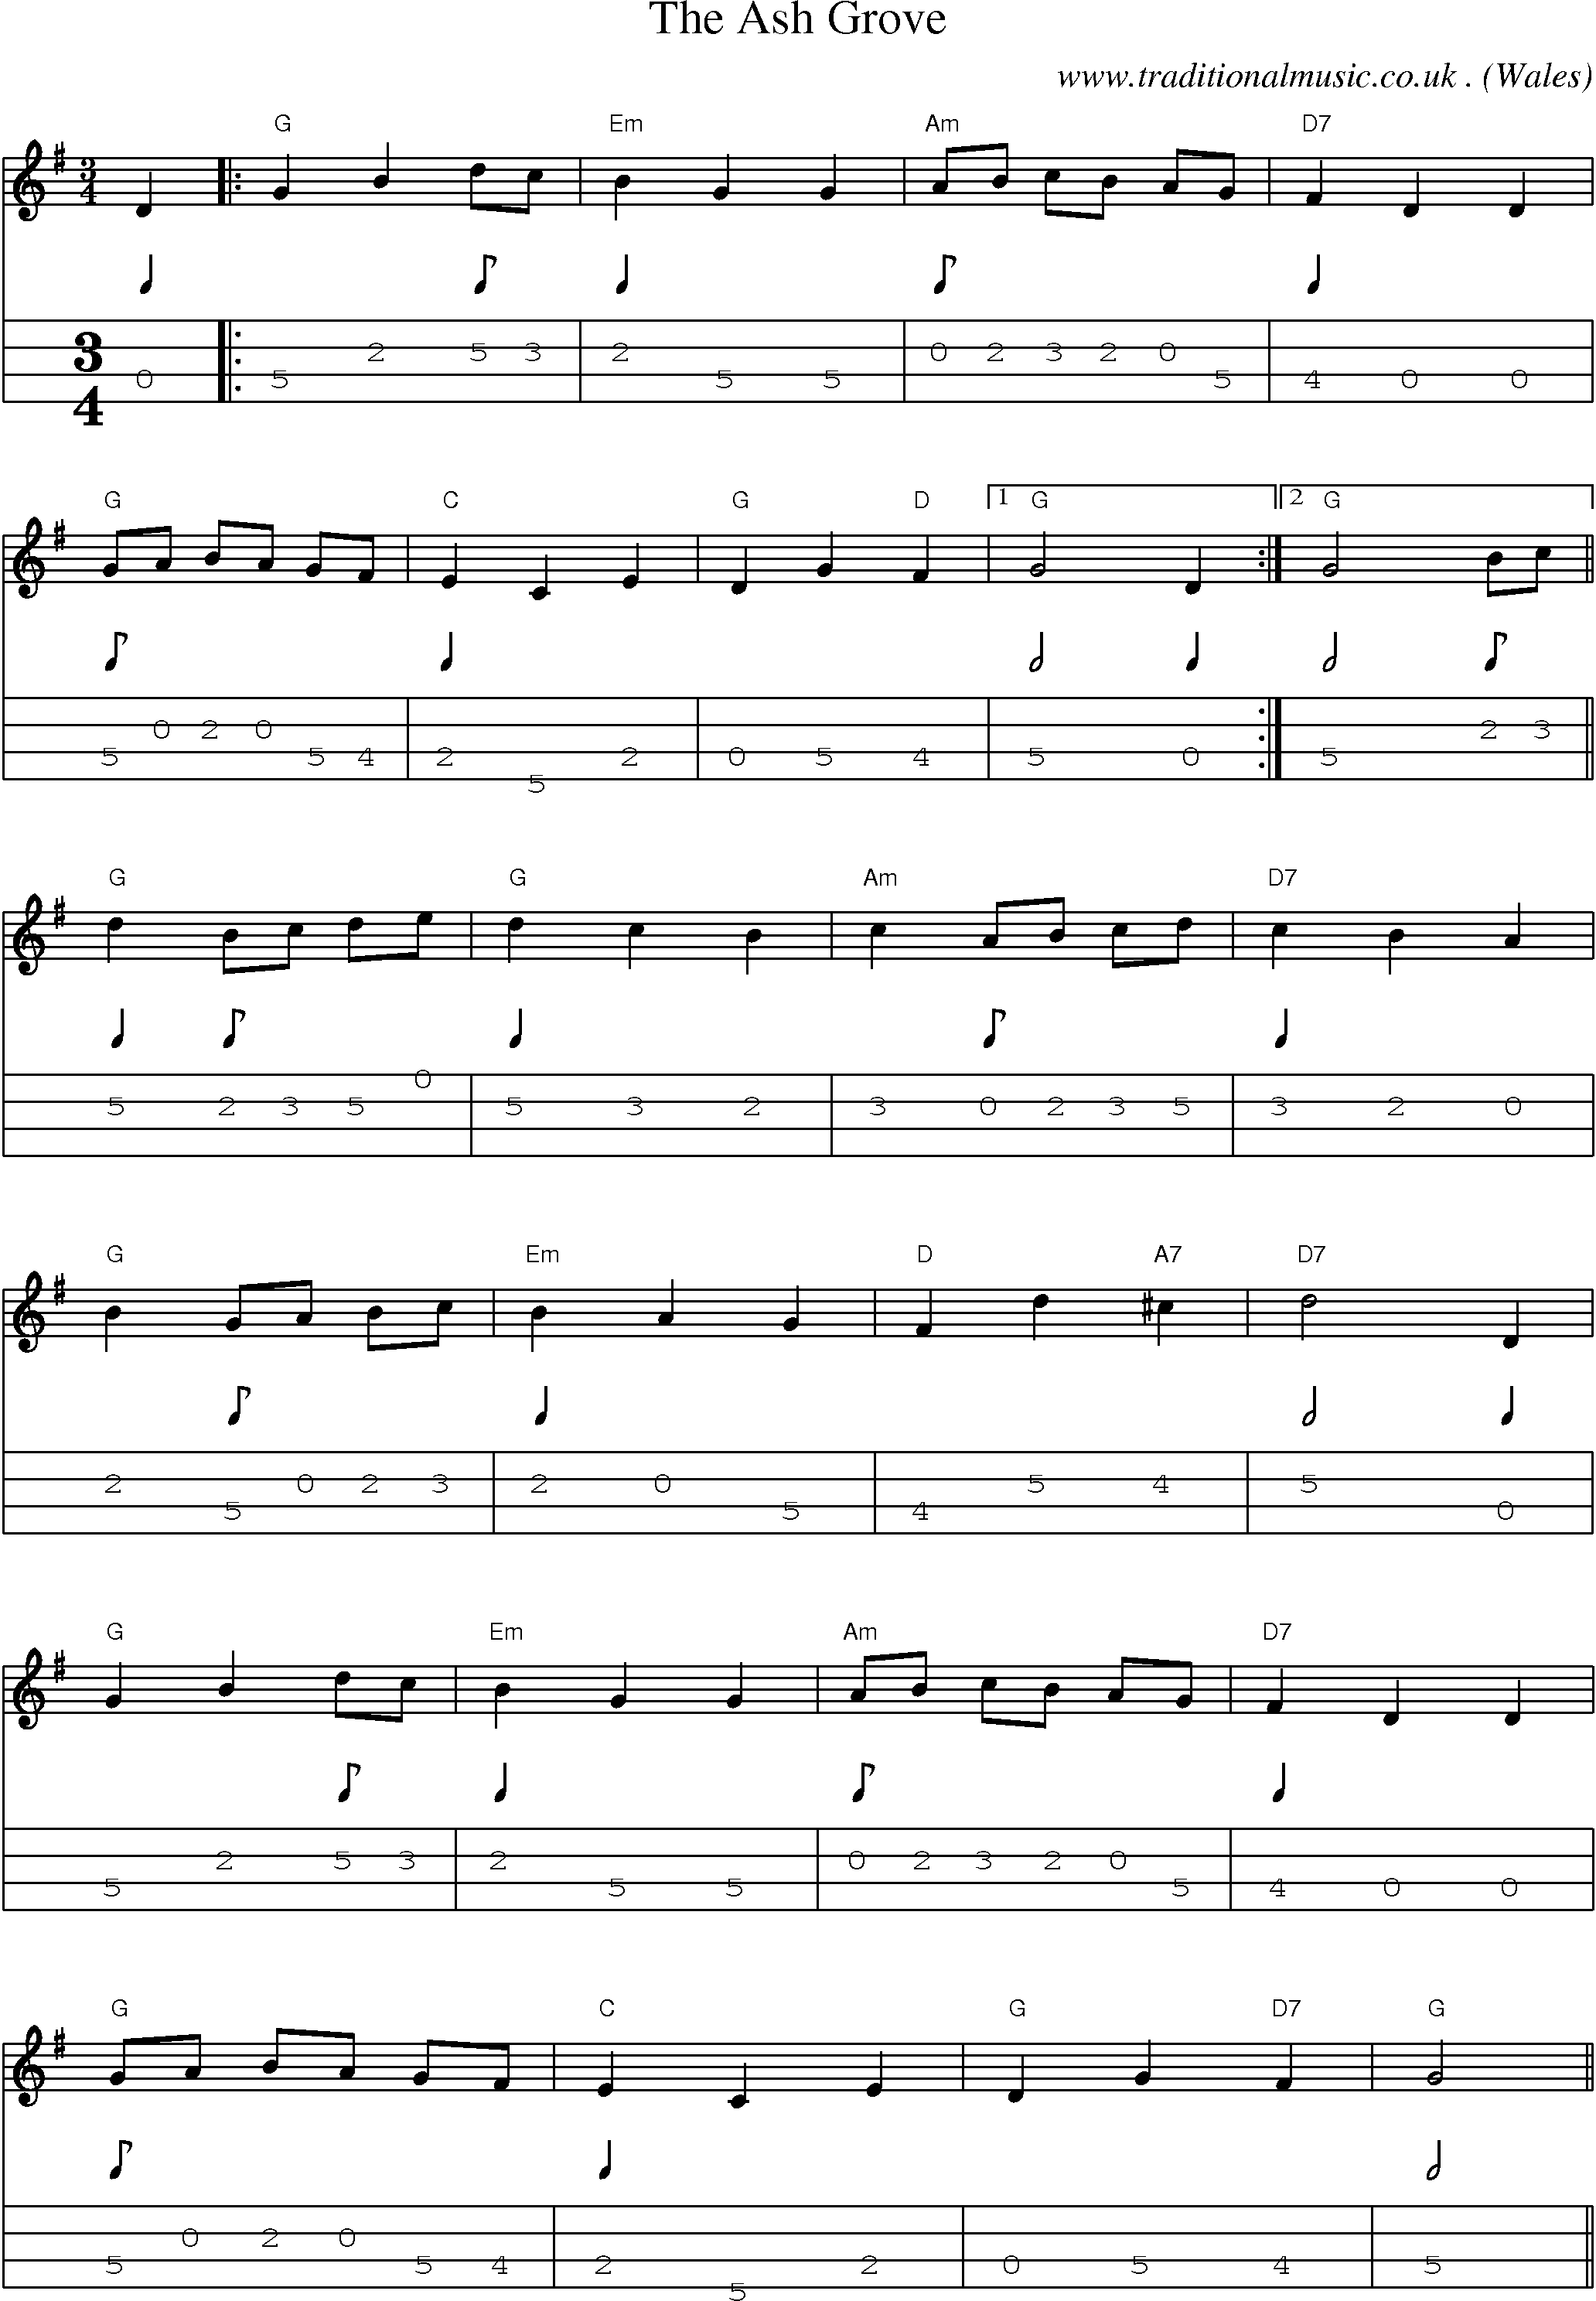 Music Score and Guitar Tabs for The Ash Grove